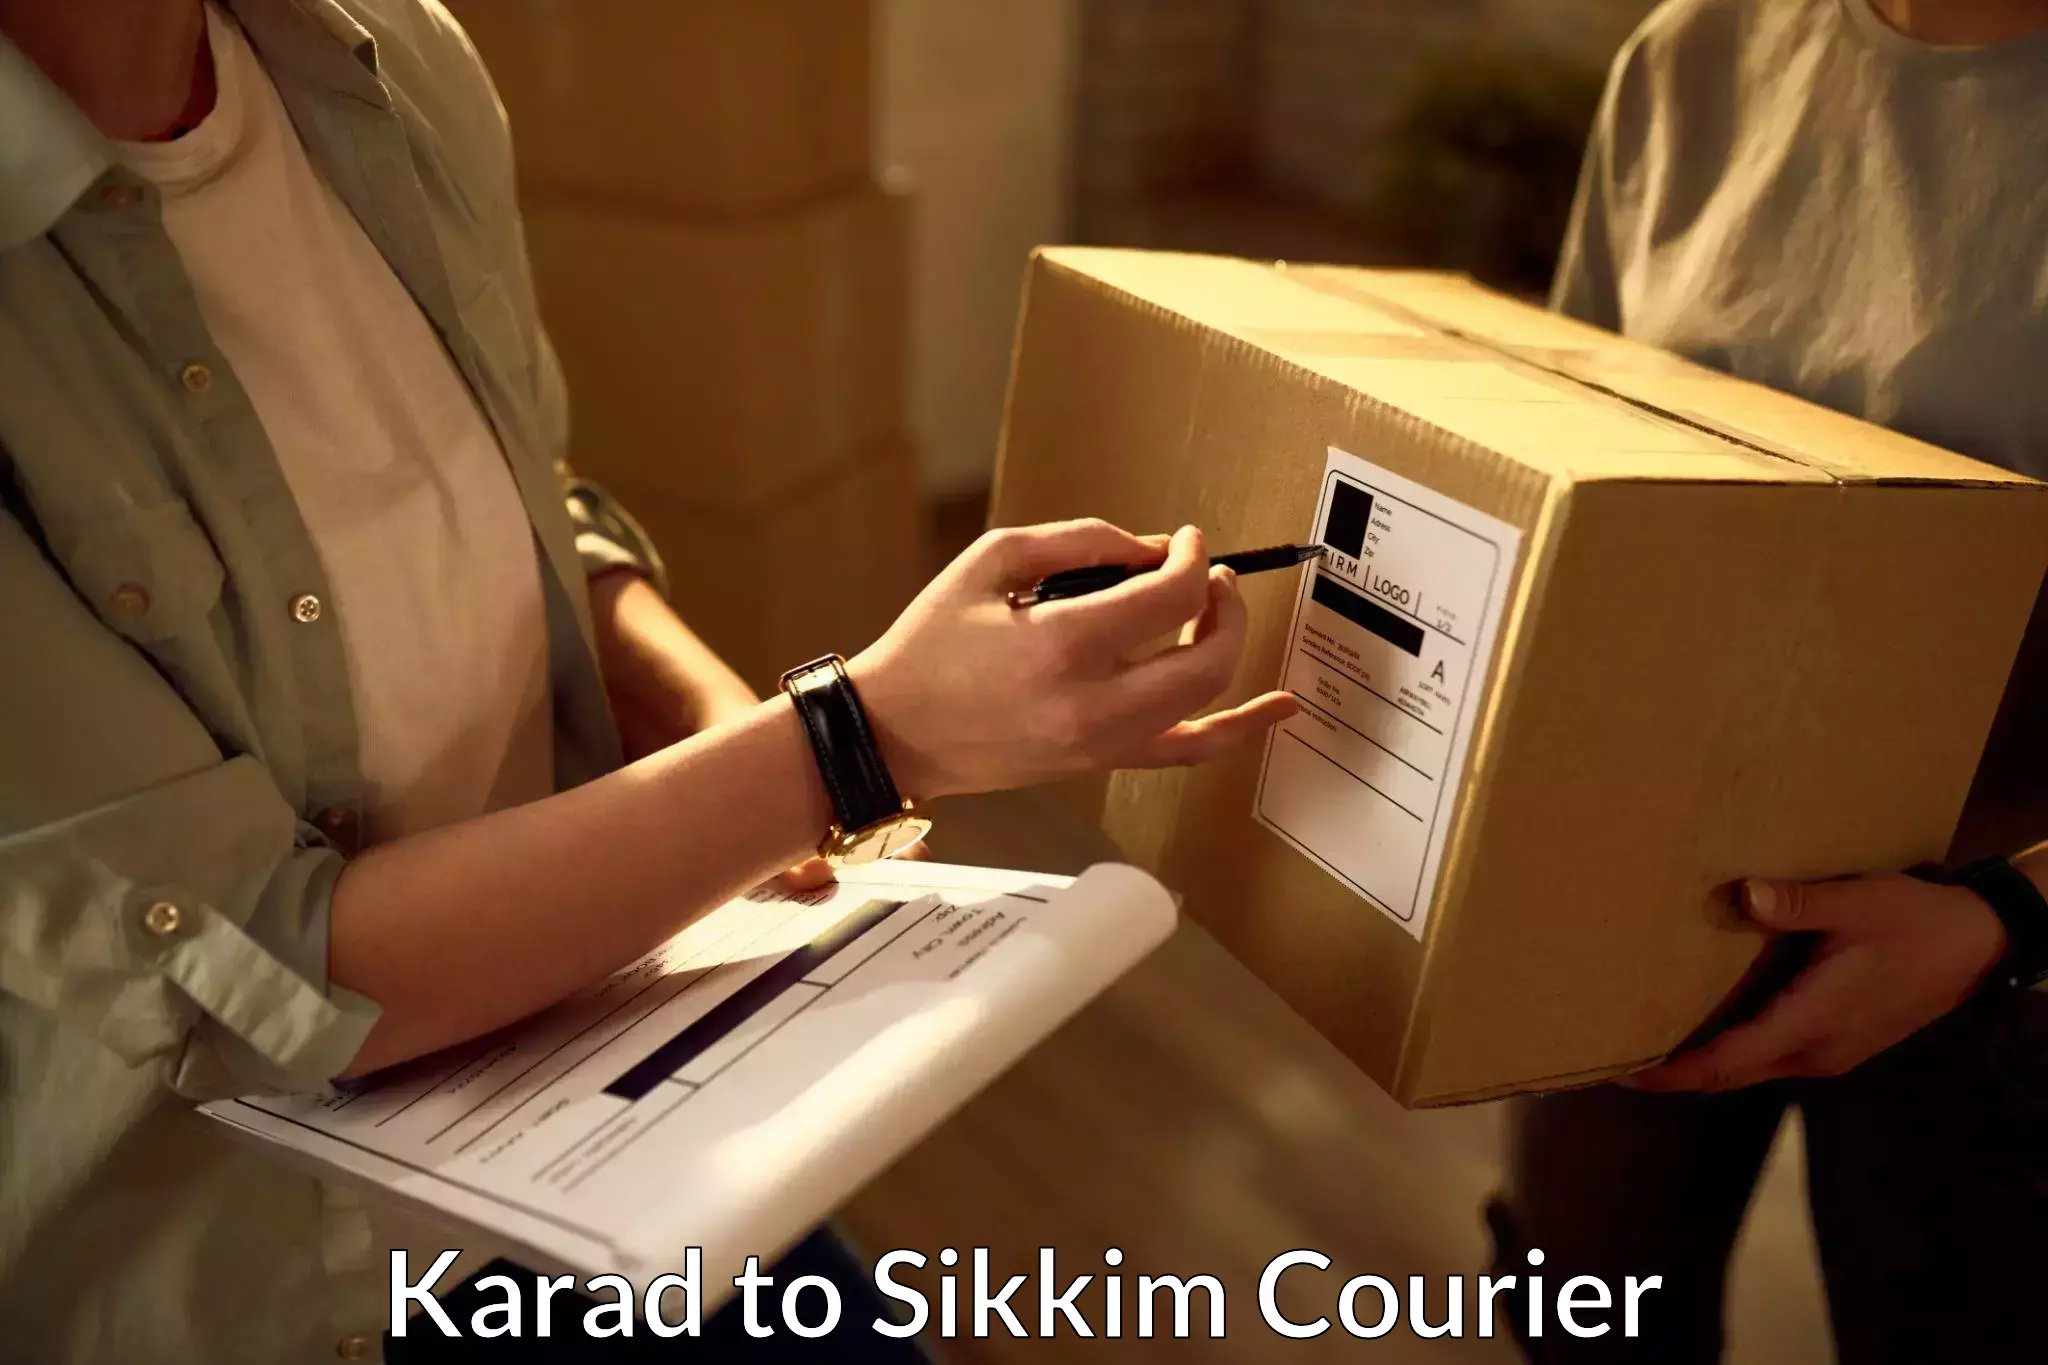 Nationwide shipping coverage Karad to North Sikkim